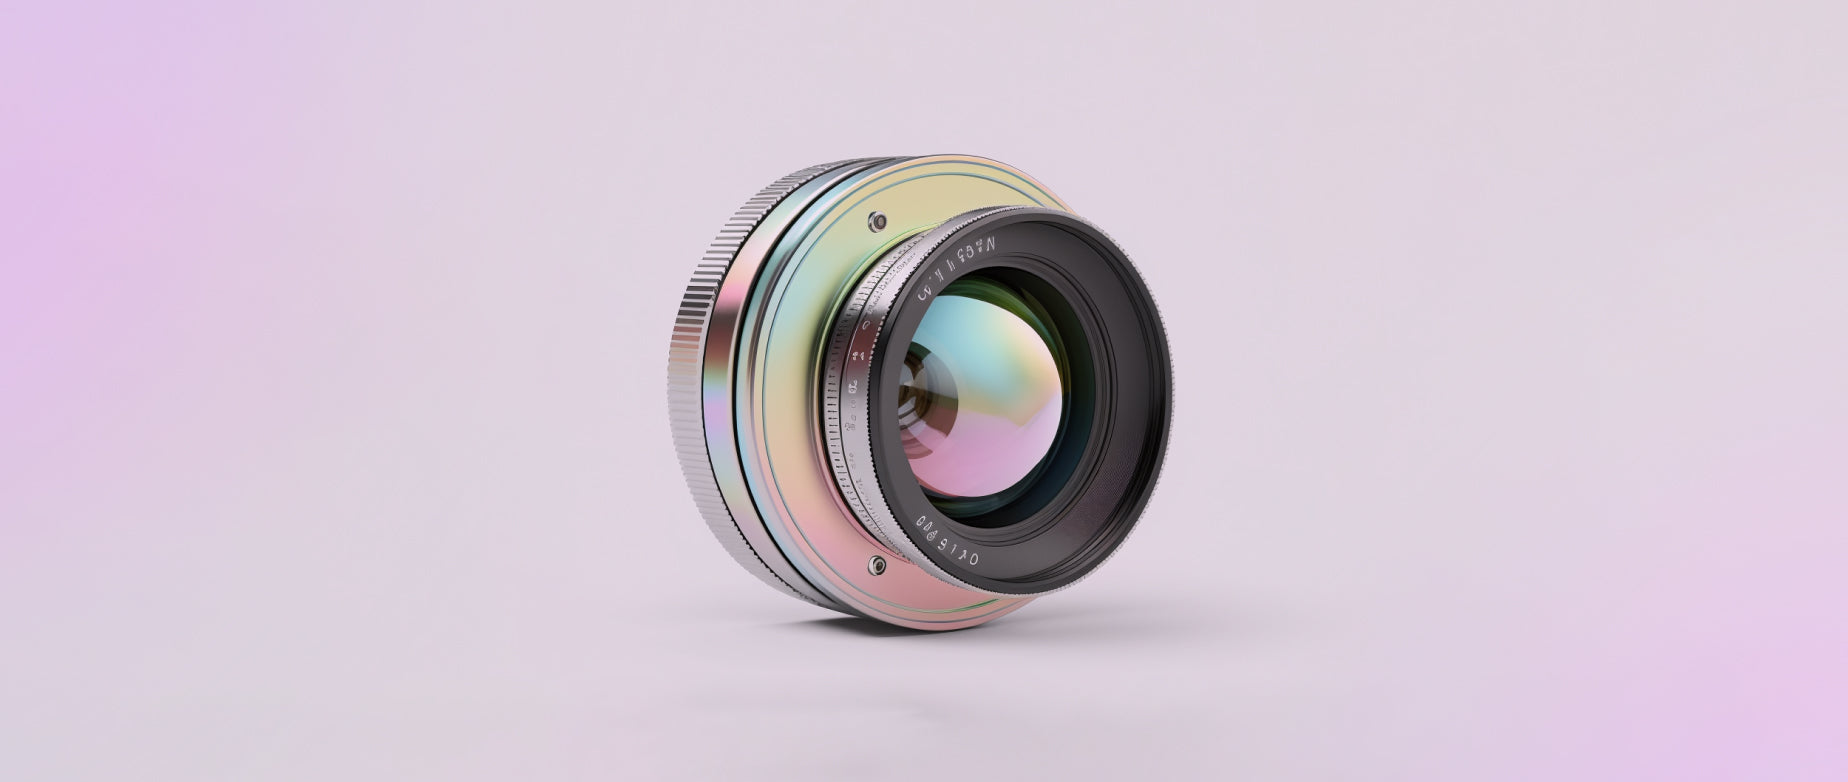 a camera lens against a pale iridescent pink background: branding photography